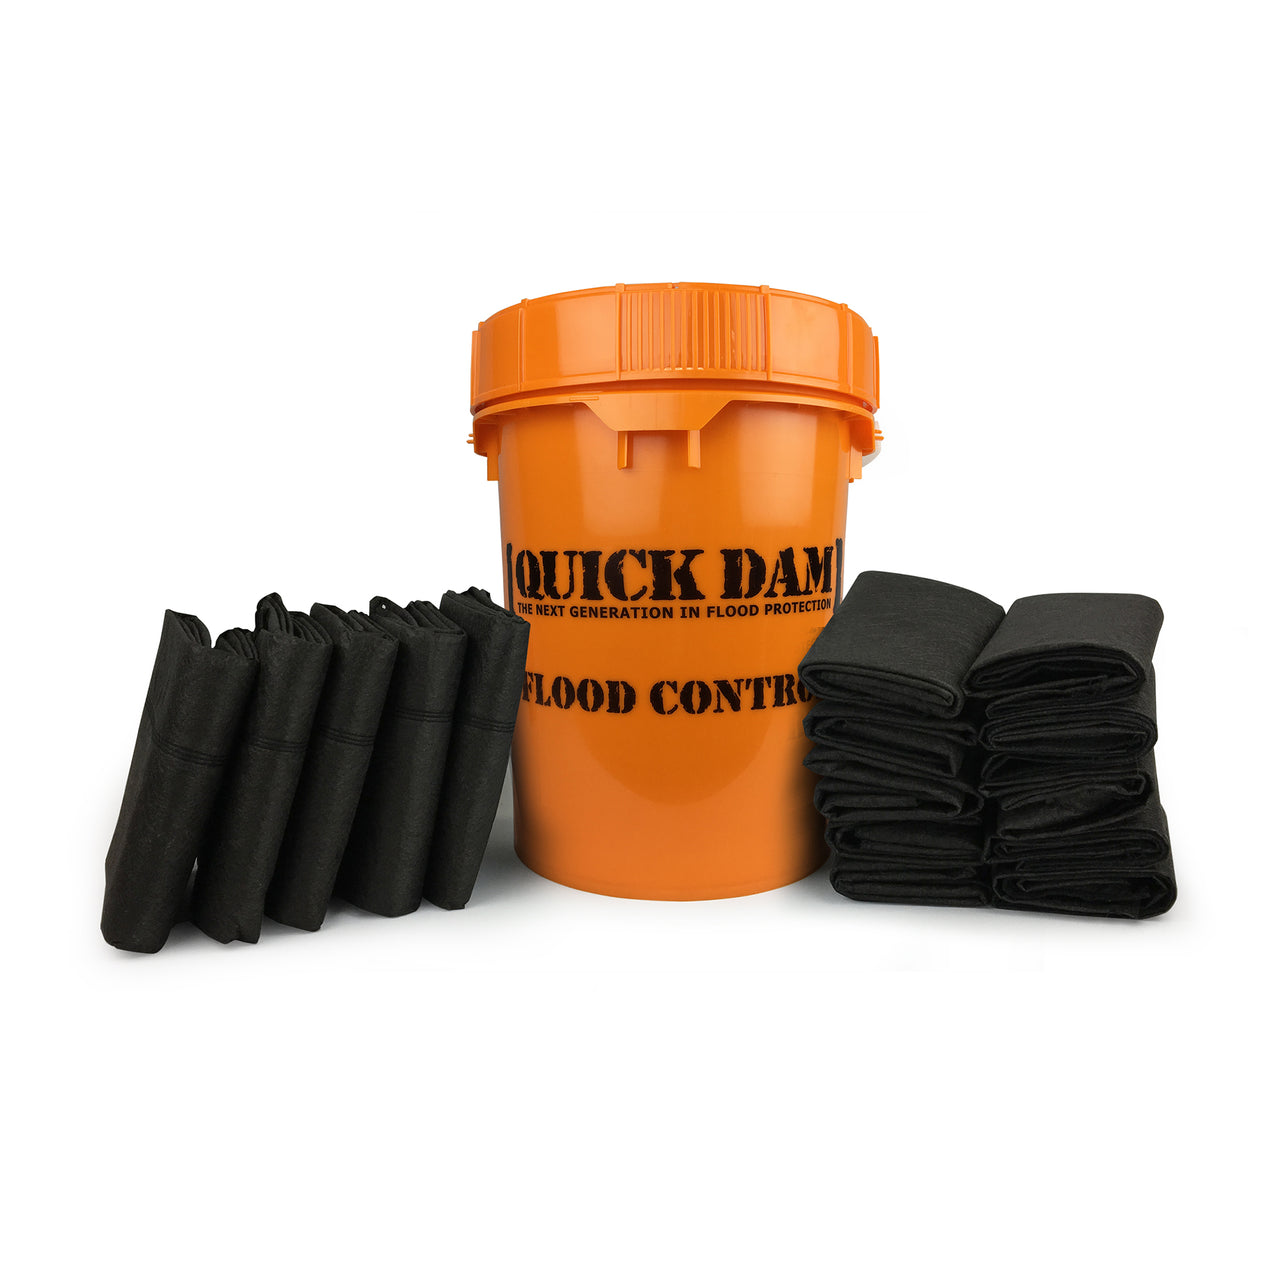 Quick Dam Grab & Go Kit - 5ft Flood Barriers (x5) and 12in x 24in Flood Bags (x10)